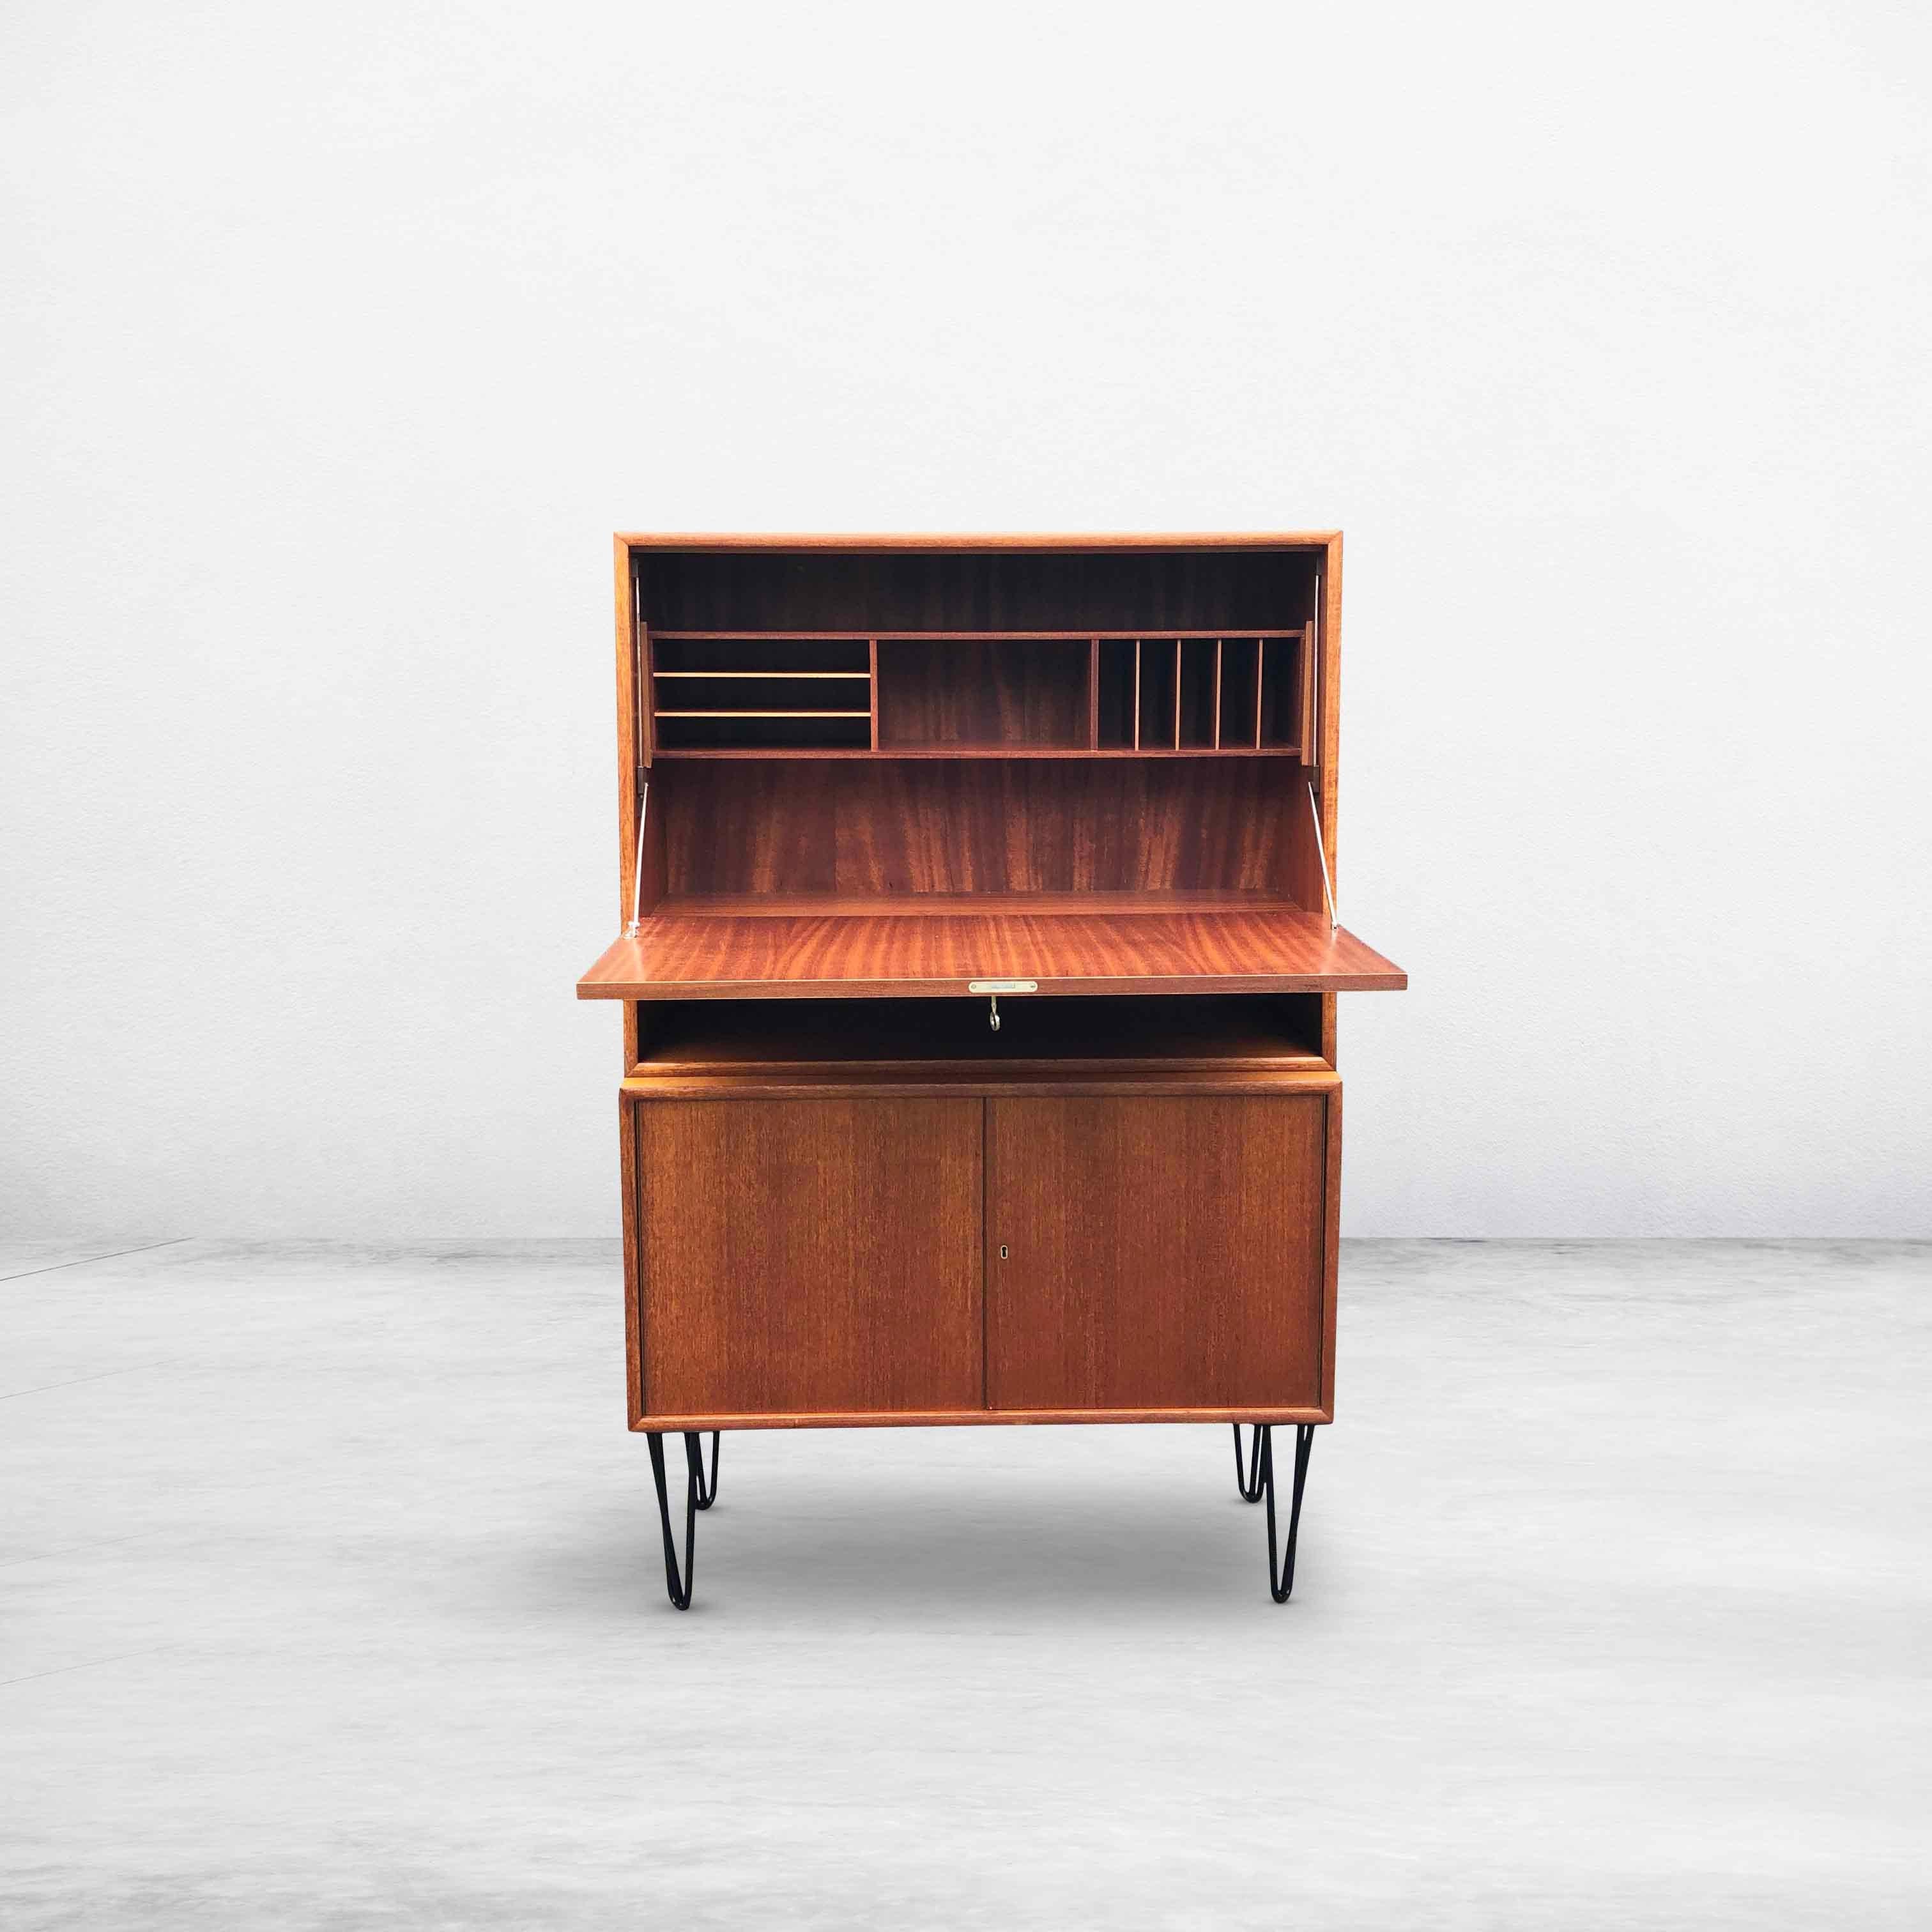 Rare mid-century secretaire/secretary or highboard from the German WK Möbel. This wooden cabinet consists of two separate parts that are placed on top of each other. The upper part is divided into different parts and can be used as a desk or bar.